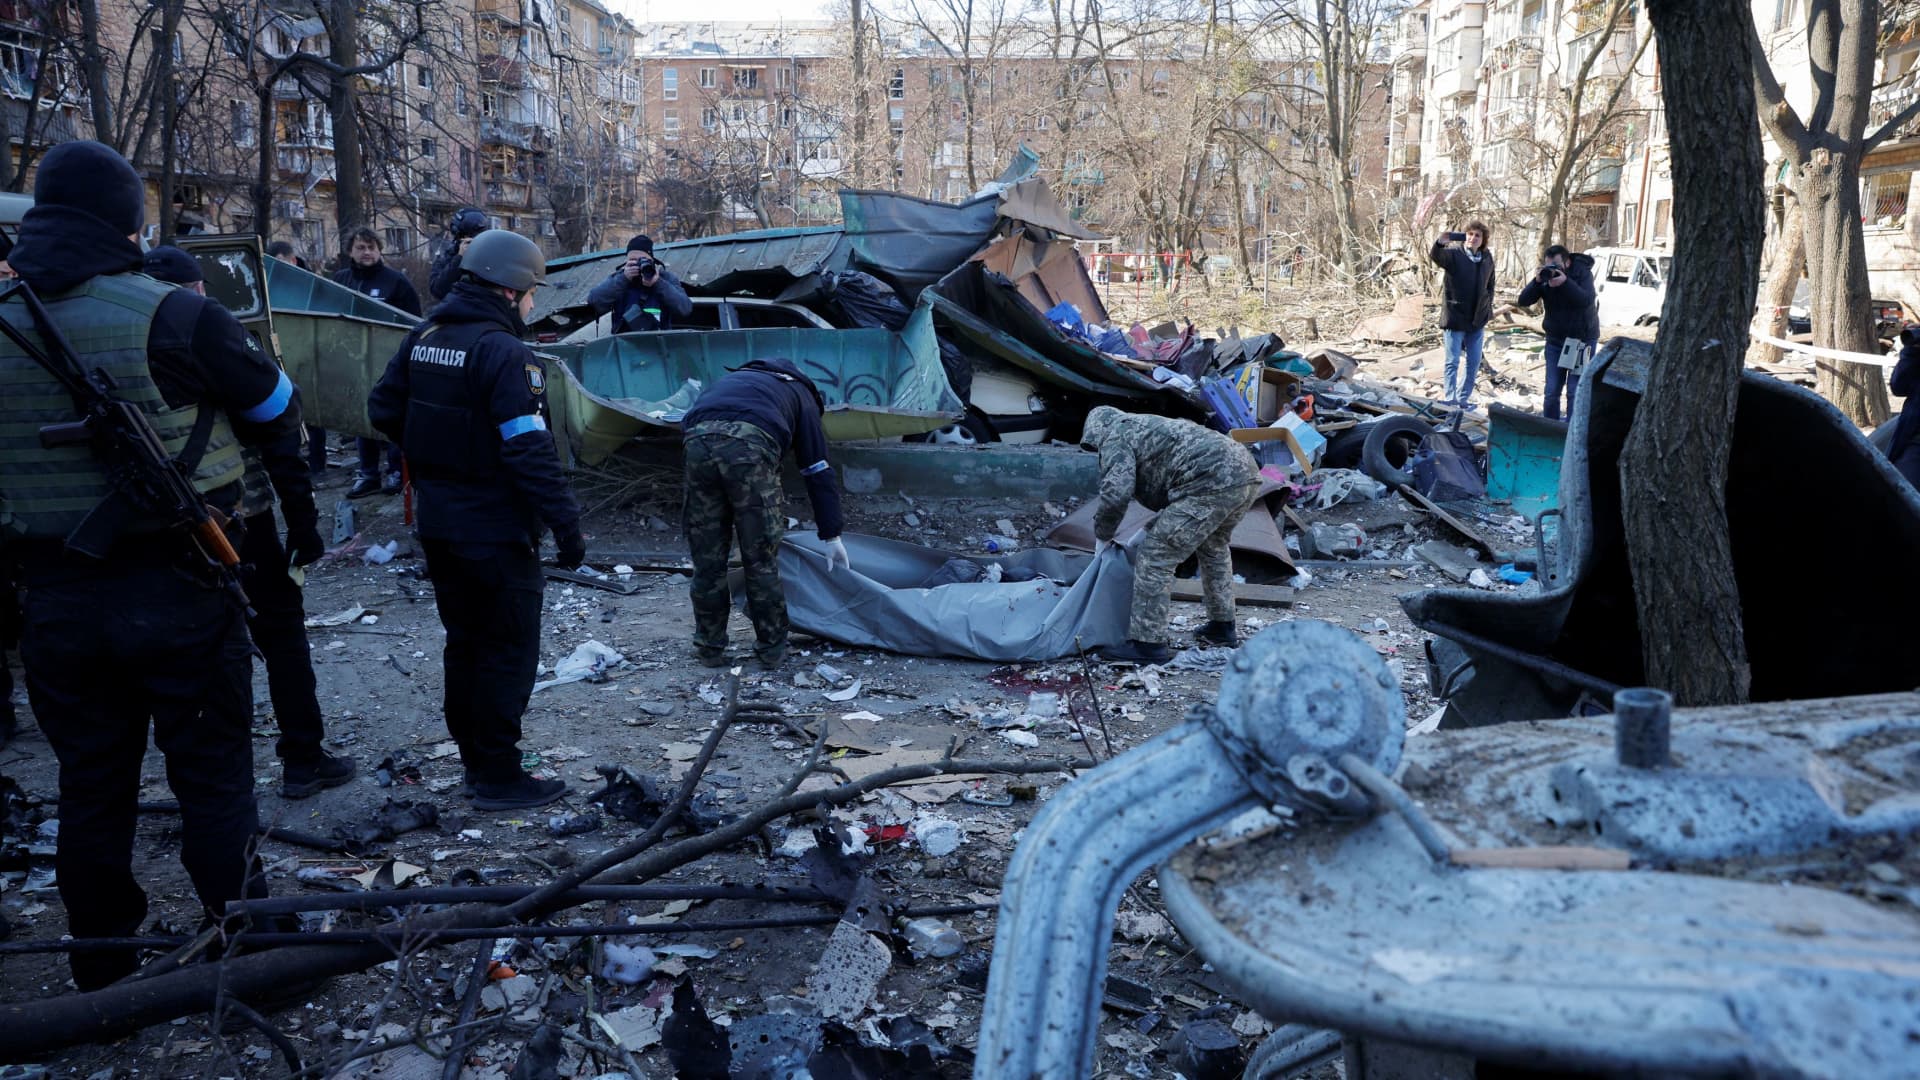 Rescue workers move the body of a person who was killed when a shell hit a residential building, as Russia's invasion of Ukraine continues, in Kyiv, Ukraine March 18, 2022.